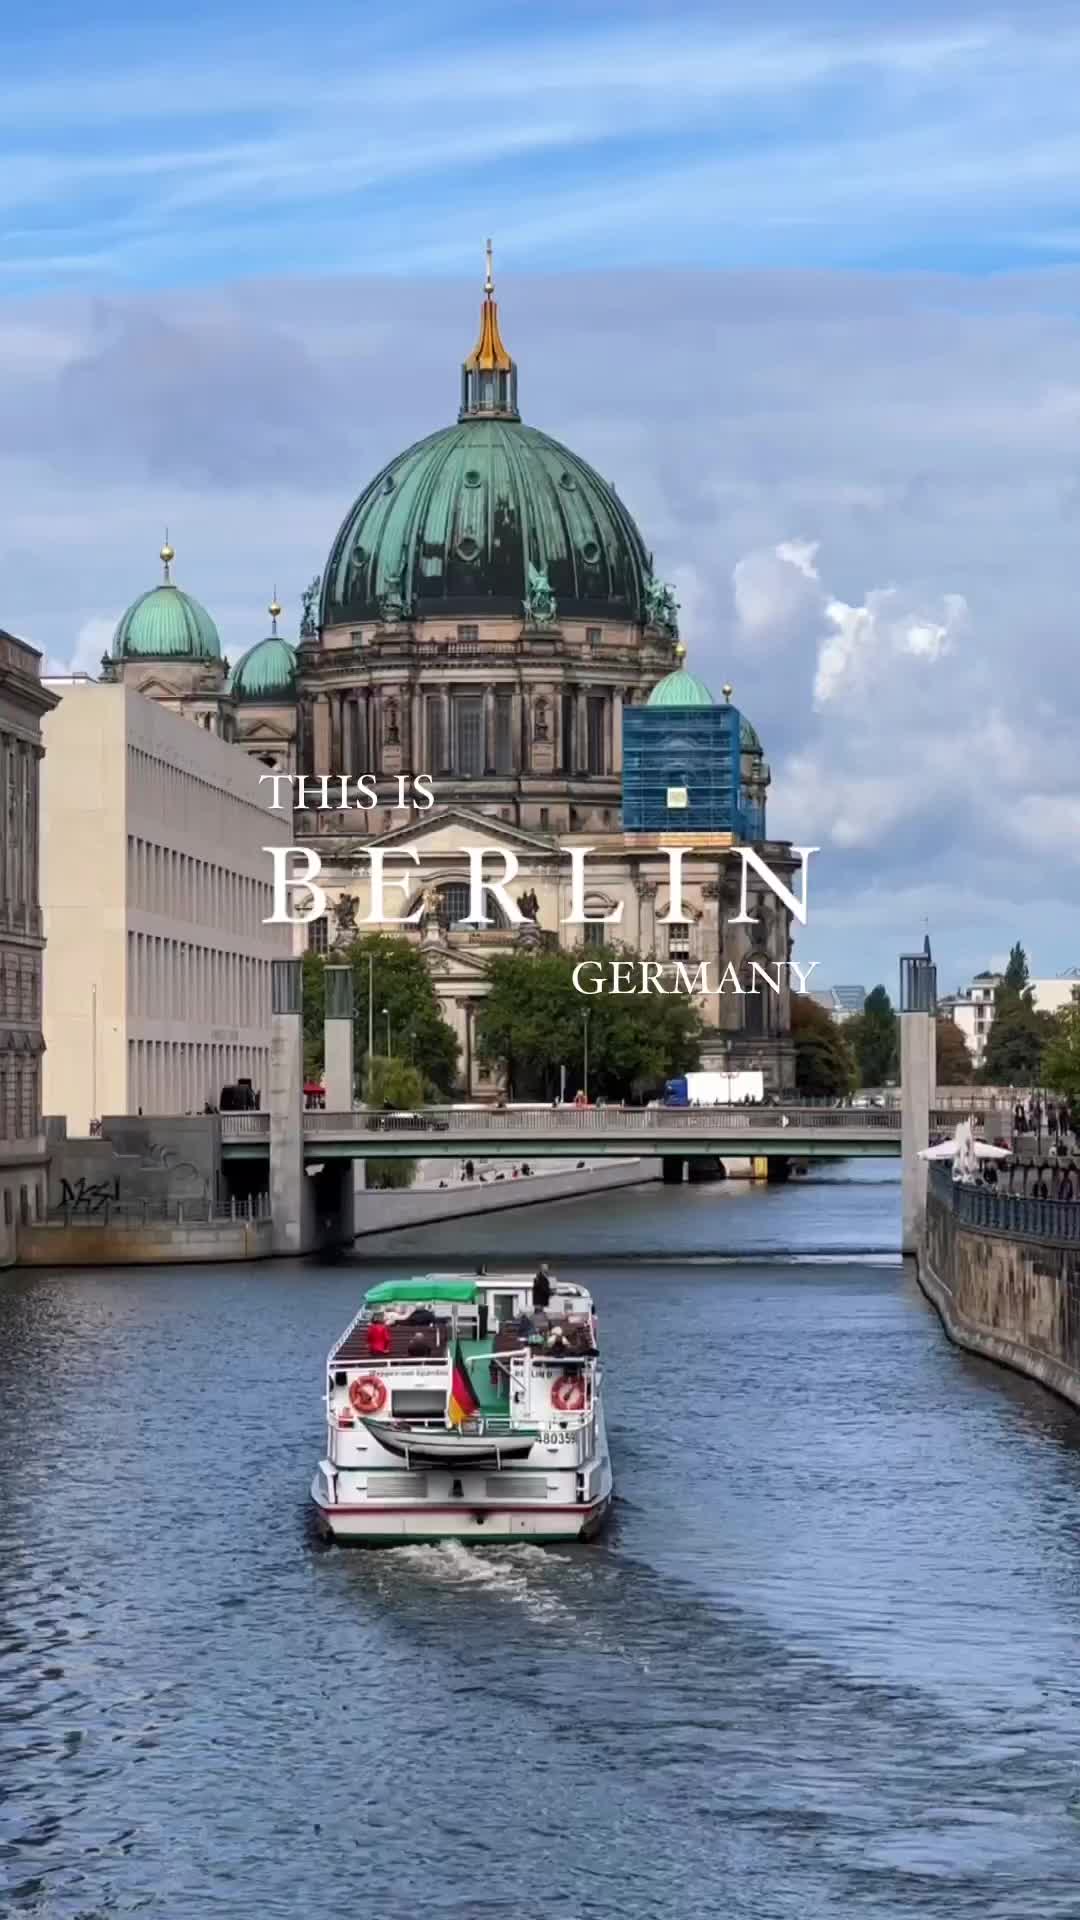 This is the capital of Germany - Berlin 🇩🇪

A city of beautiful historical landmarks and modern architecture, a city of art, artists and museums, a city of bustling nightlife and unbeatable dining experiences - Berlin is a creative and cultural hub with a vibrant buzz and edgy vibe that also embraces a laid-back lifestyle.

📌 Save for your next trip to Germany! 

Locations as they appear 👇🏻

Intro:📍Berlin Cathedral from Mühlendammbrücke
📍Café Holzmarktperle at Holzmarkt 25 
📍Berlin Cathedral from Karl-Liebknecht-Brücke
📍Capvin Rosenhöfe pizza takeaway
📍Haus Schwarzenberg
📍Altes Museum
📍Burgermeister Schlesisches Tor
📍Kolonnadenhof - Alte Nationalgalerie
📍Space Night Hostel
📍Lustgarten
📍Glass Dome at the Reichstag Building
📍View of the Fernsehturm from Humboldt Promenade 
📍Berlin Hauptbahnhof (Berlin Central Station) 

#travel #budgettravel #europe #visiteurope #europeexplores #europe #visiteurope #europedestination #europestyle #europeperfection#nuremberg #berlin #loveberlin #germanyexplores #germany #visitgermany #deutschland #beautifulgermany #travelinspiration #travel #shotonmobile #shotonmobile #germanyreel